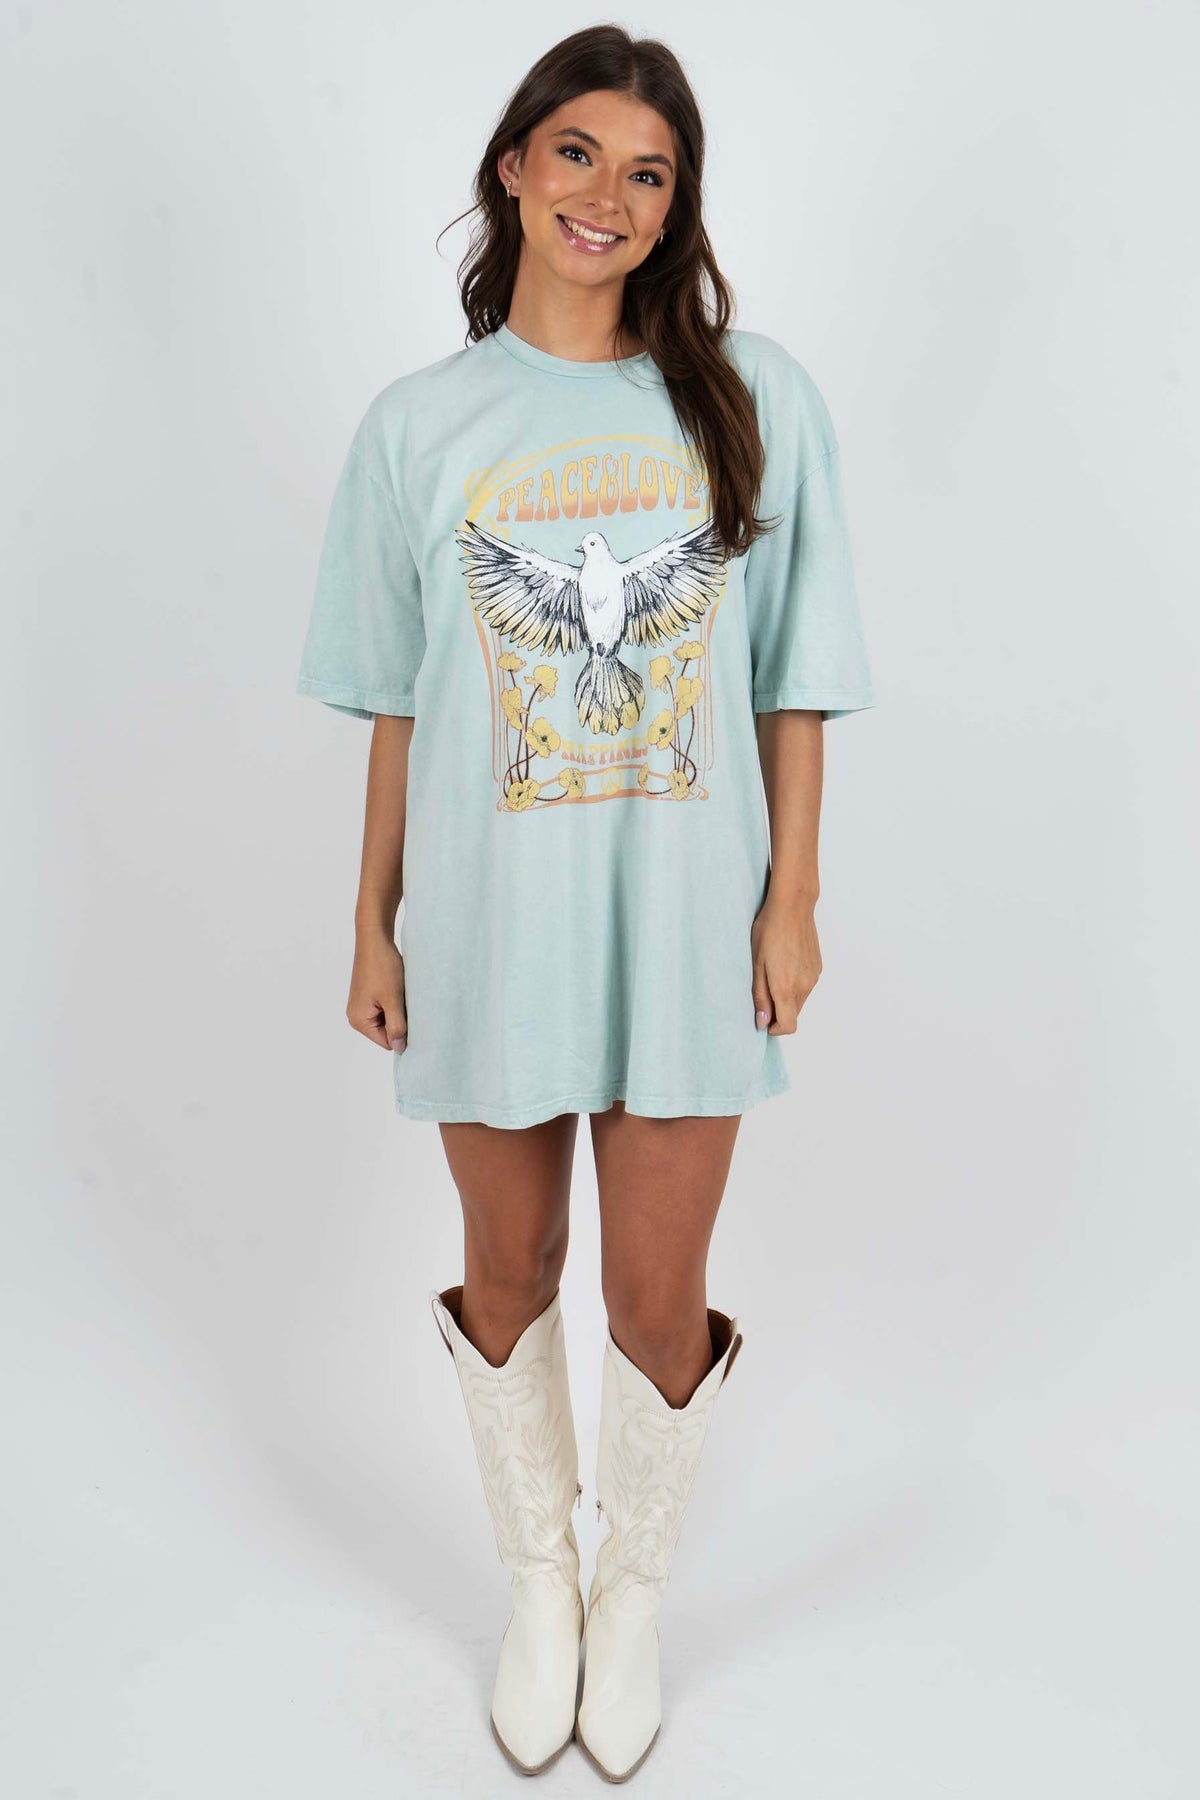 Peace Love Happiness Graphic Tee